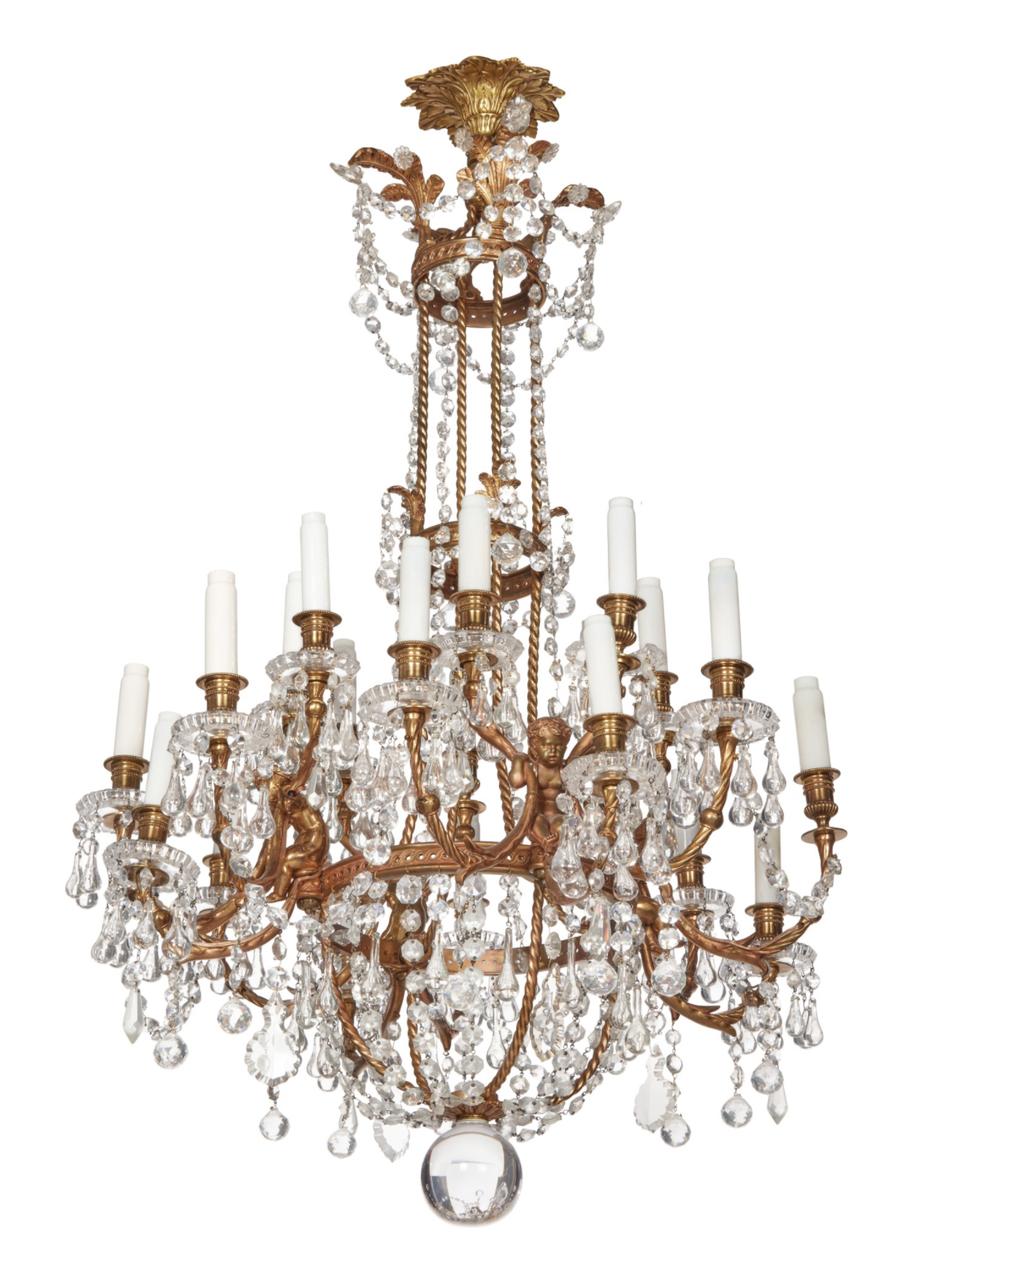 20th Century Chandelier by Baccarat, Circa 1900